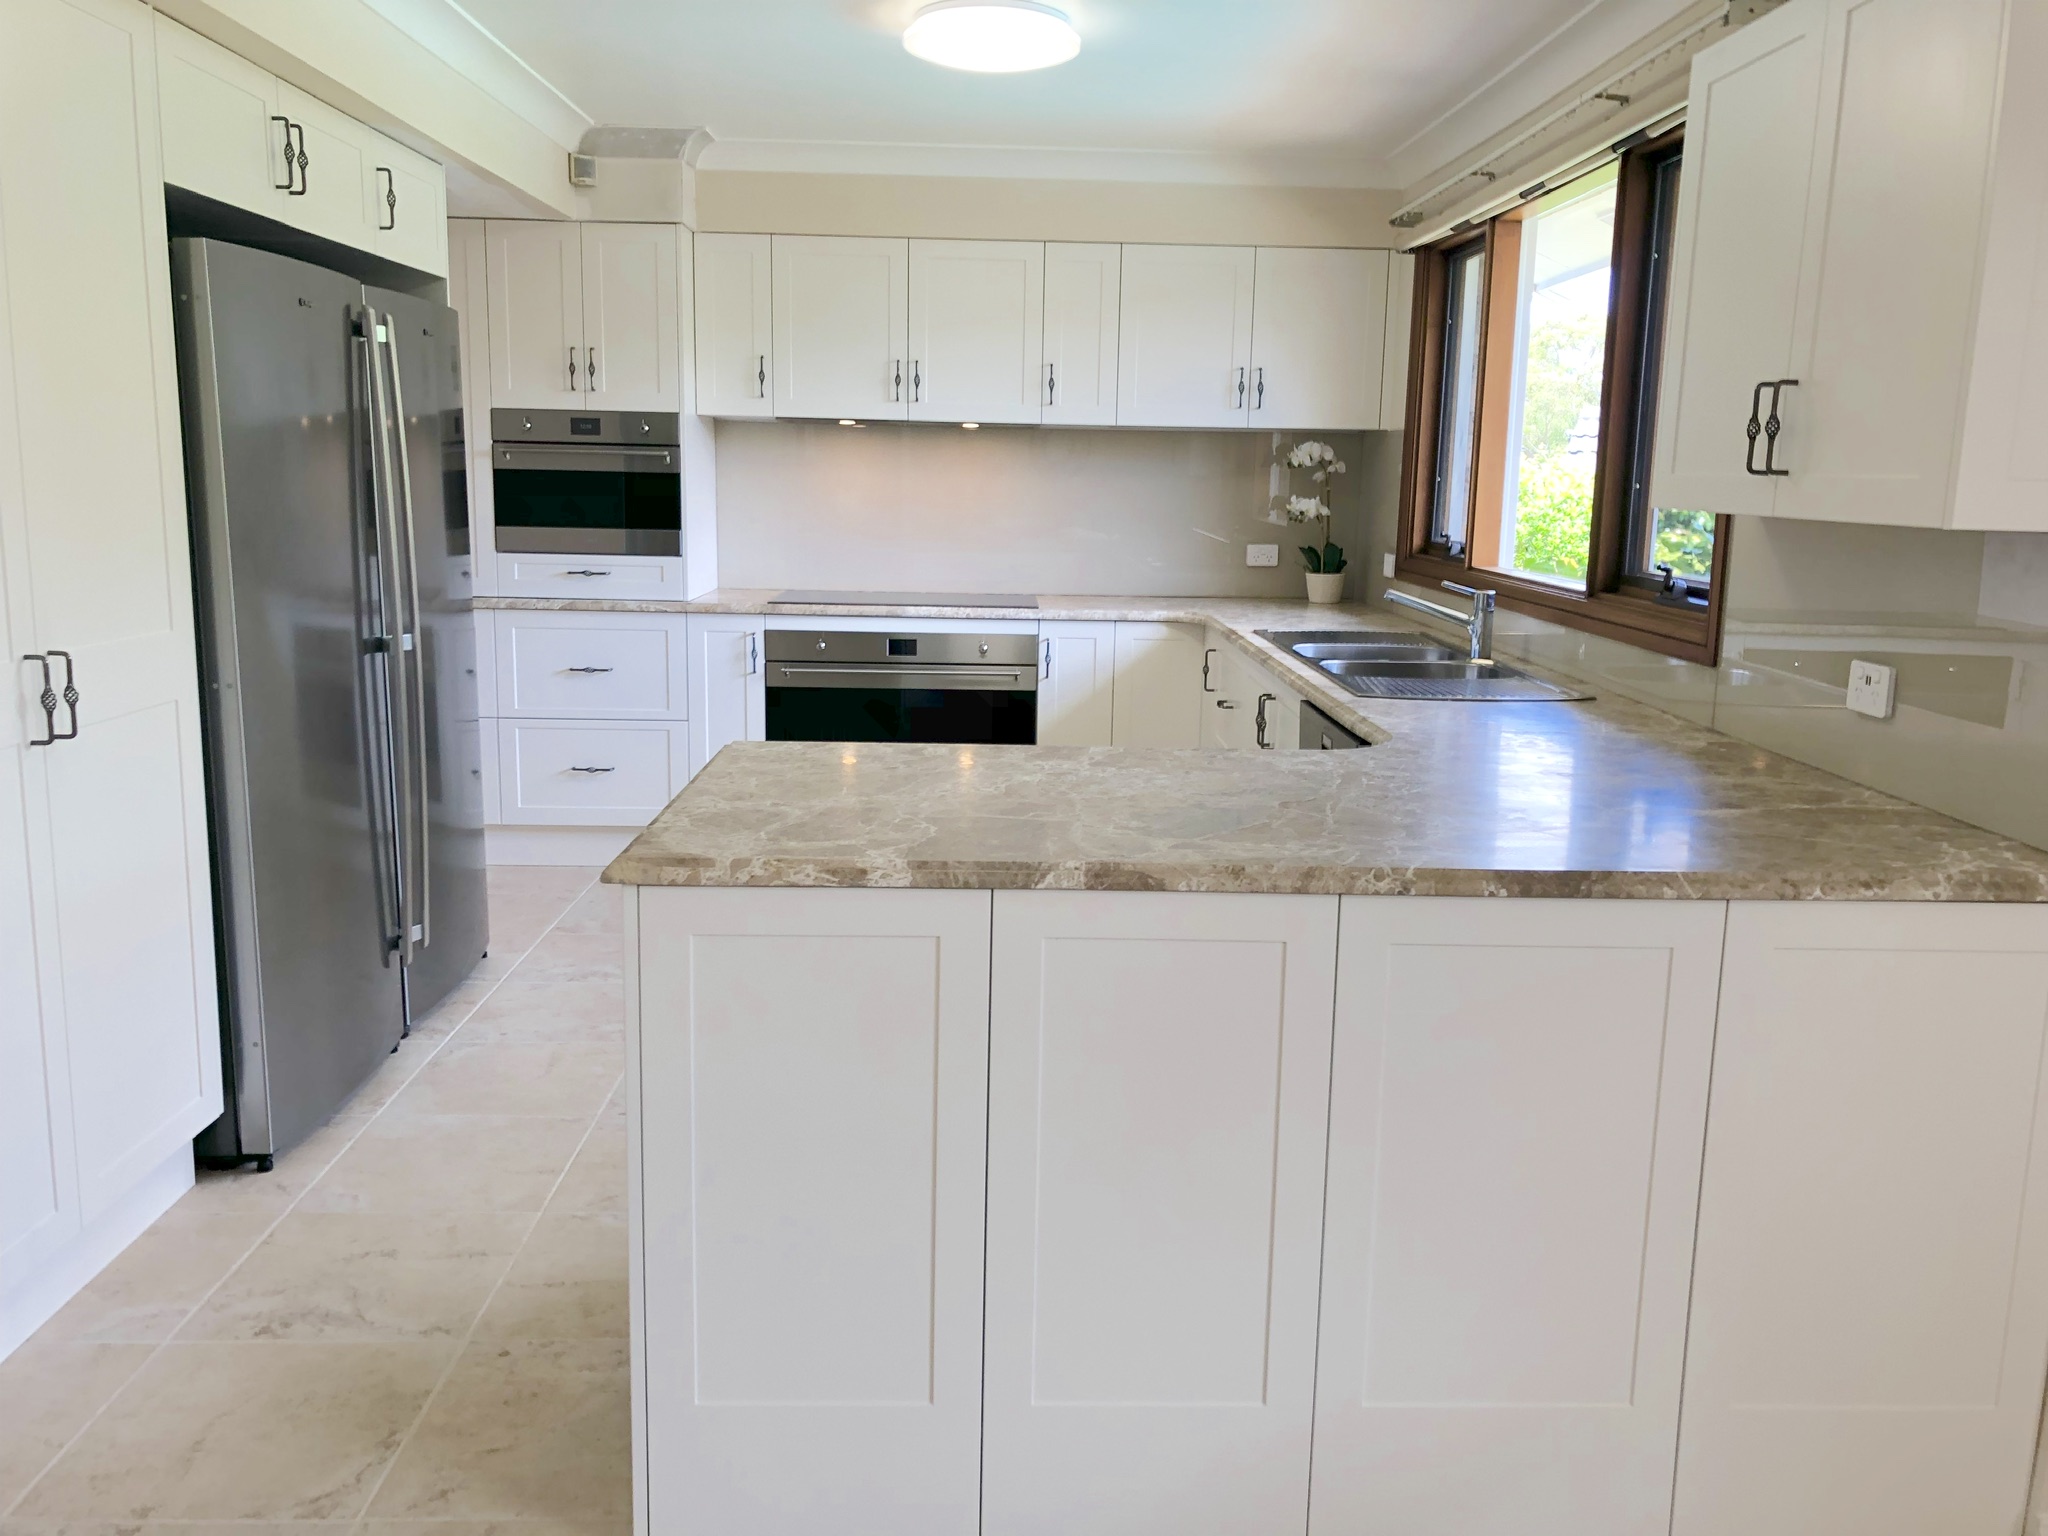 Timeless shaker cabinets with natural marble benchtops - kitchen renovation by Master Bathrooms & Kitchens